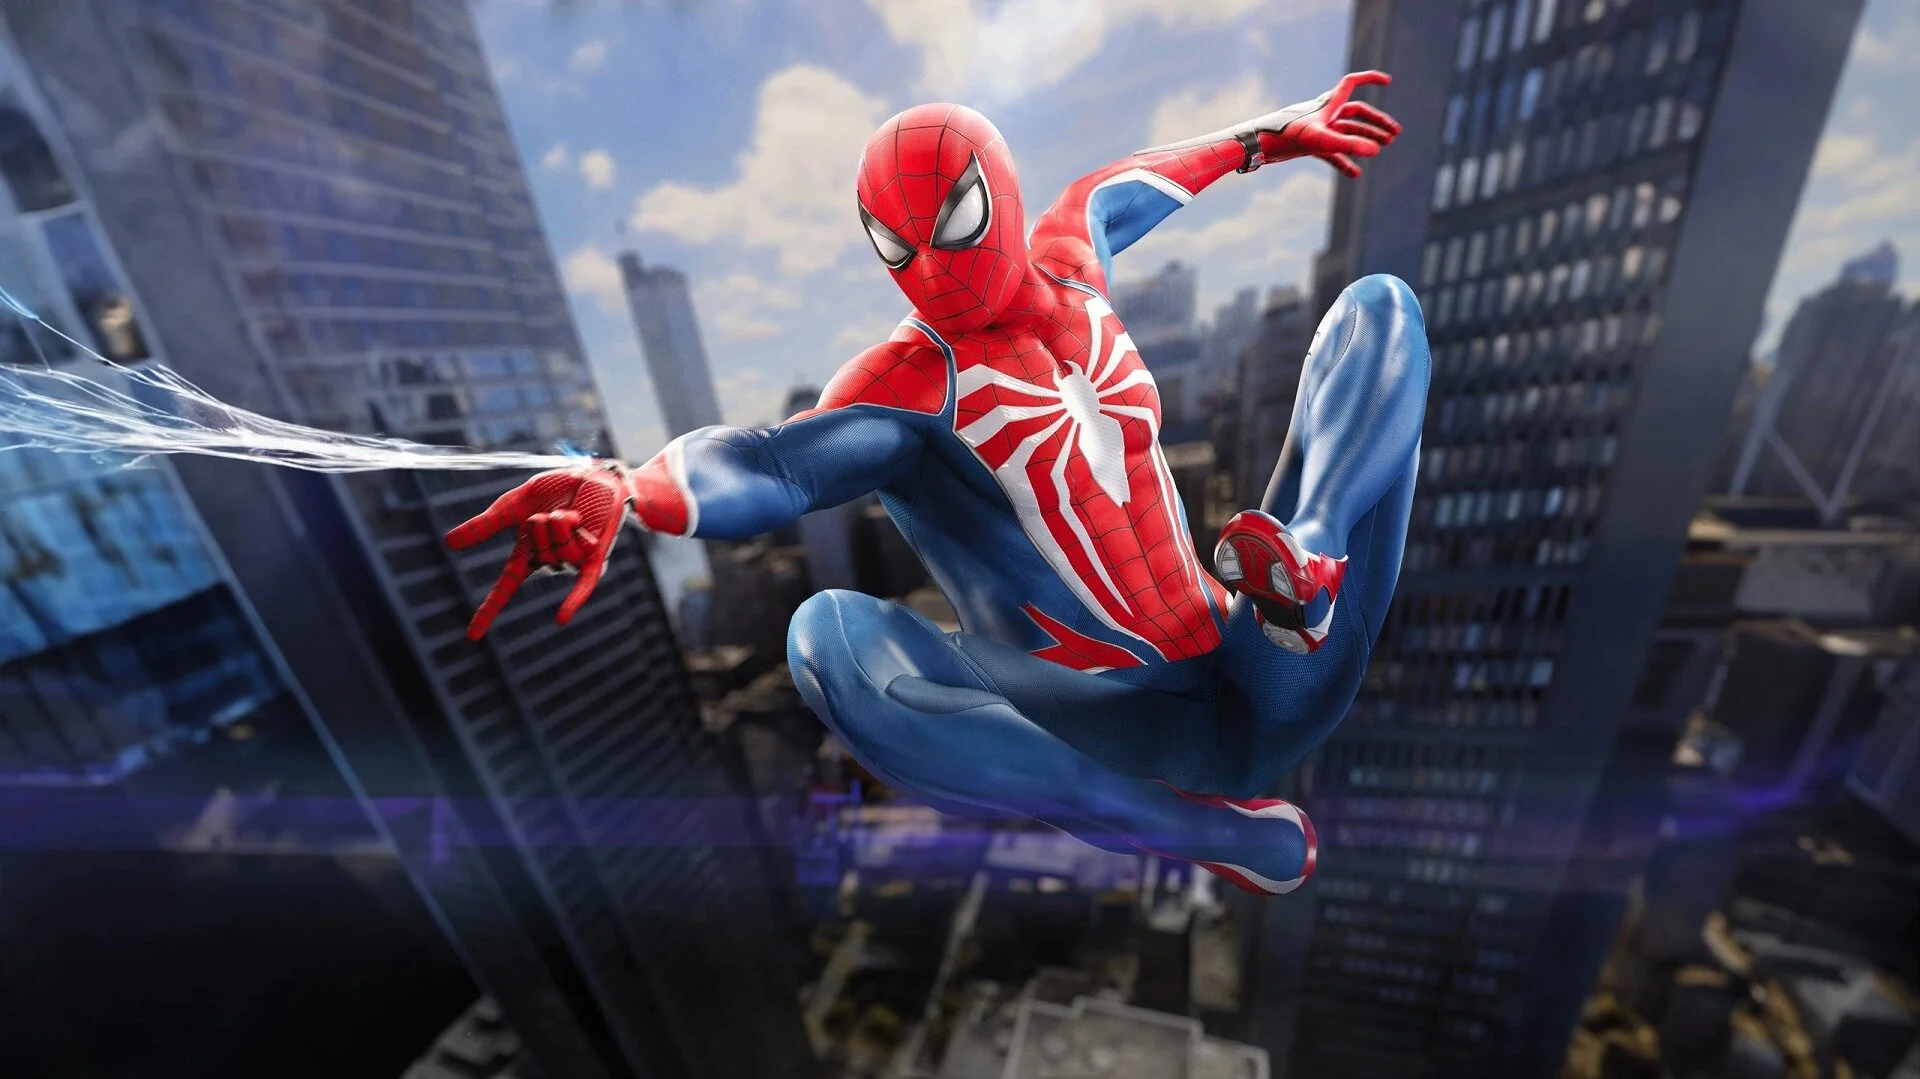 Marvel's Spider-Man 2 received an update that fixes missing saves in the game